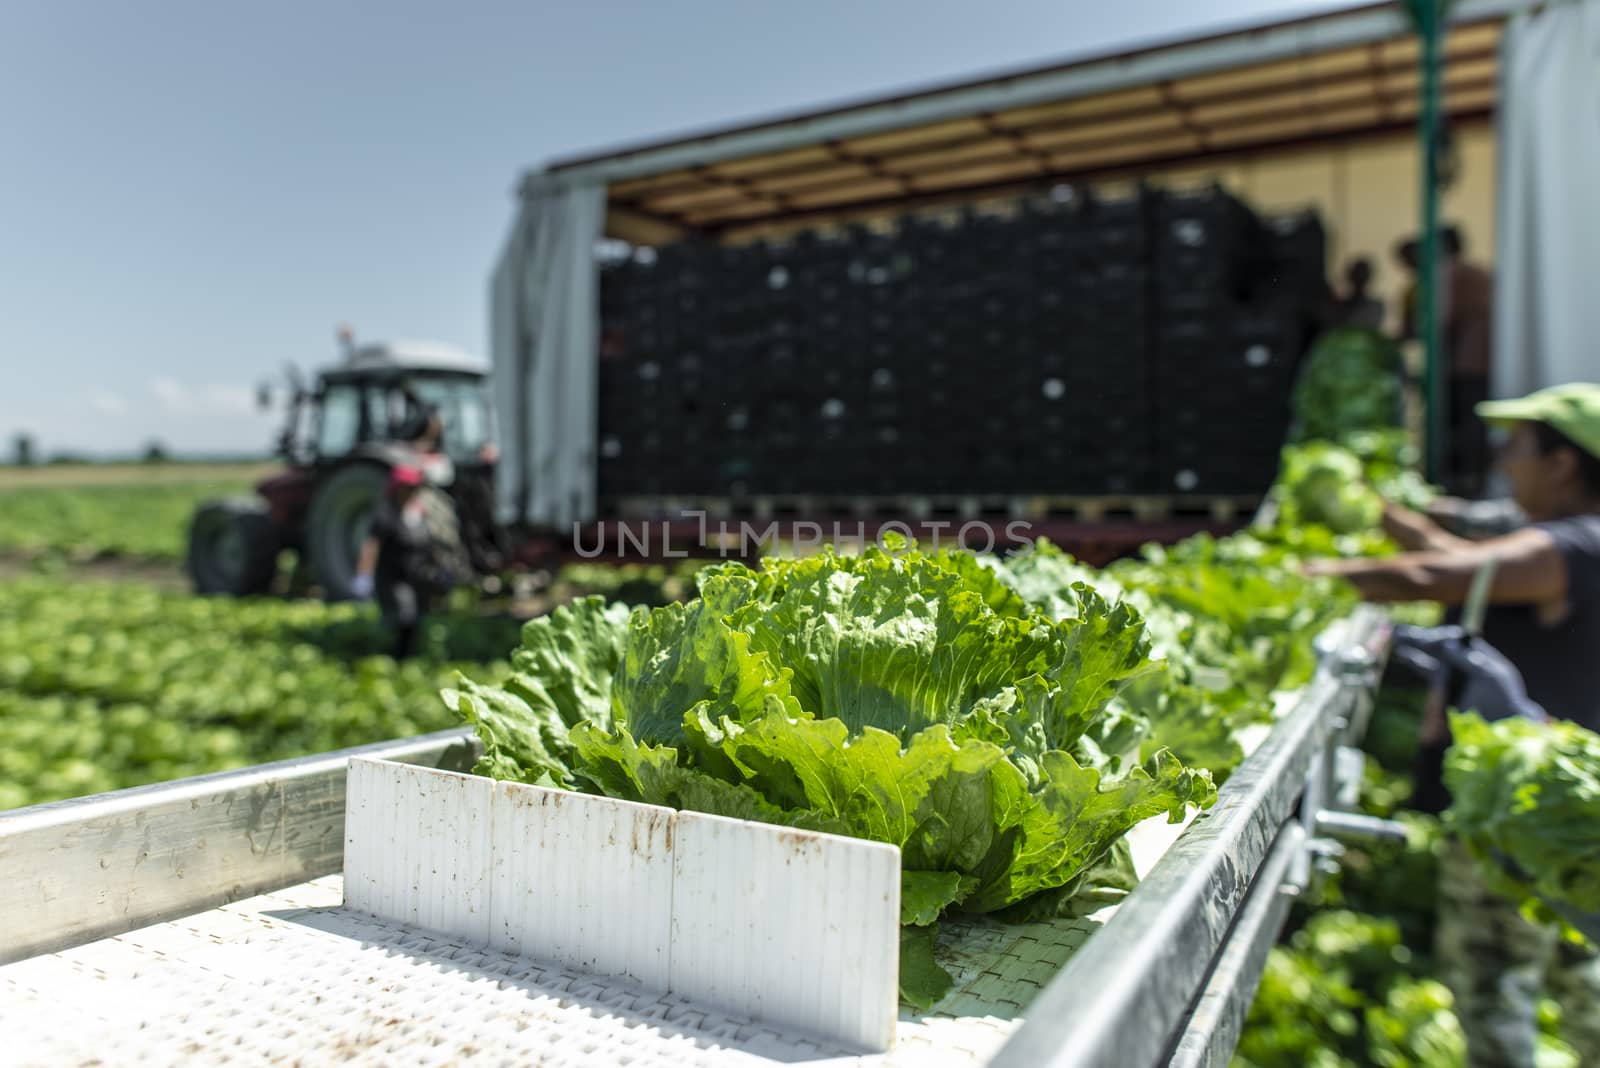 Tractor with production line for harvest lettuce automatically. Lettuce iceberg picking machine on the field in farm. Concept for automatization in the agriculture.